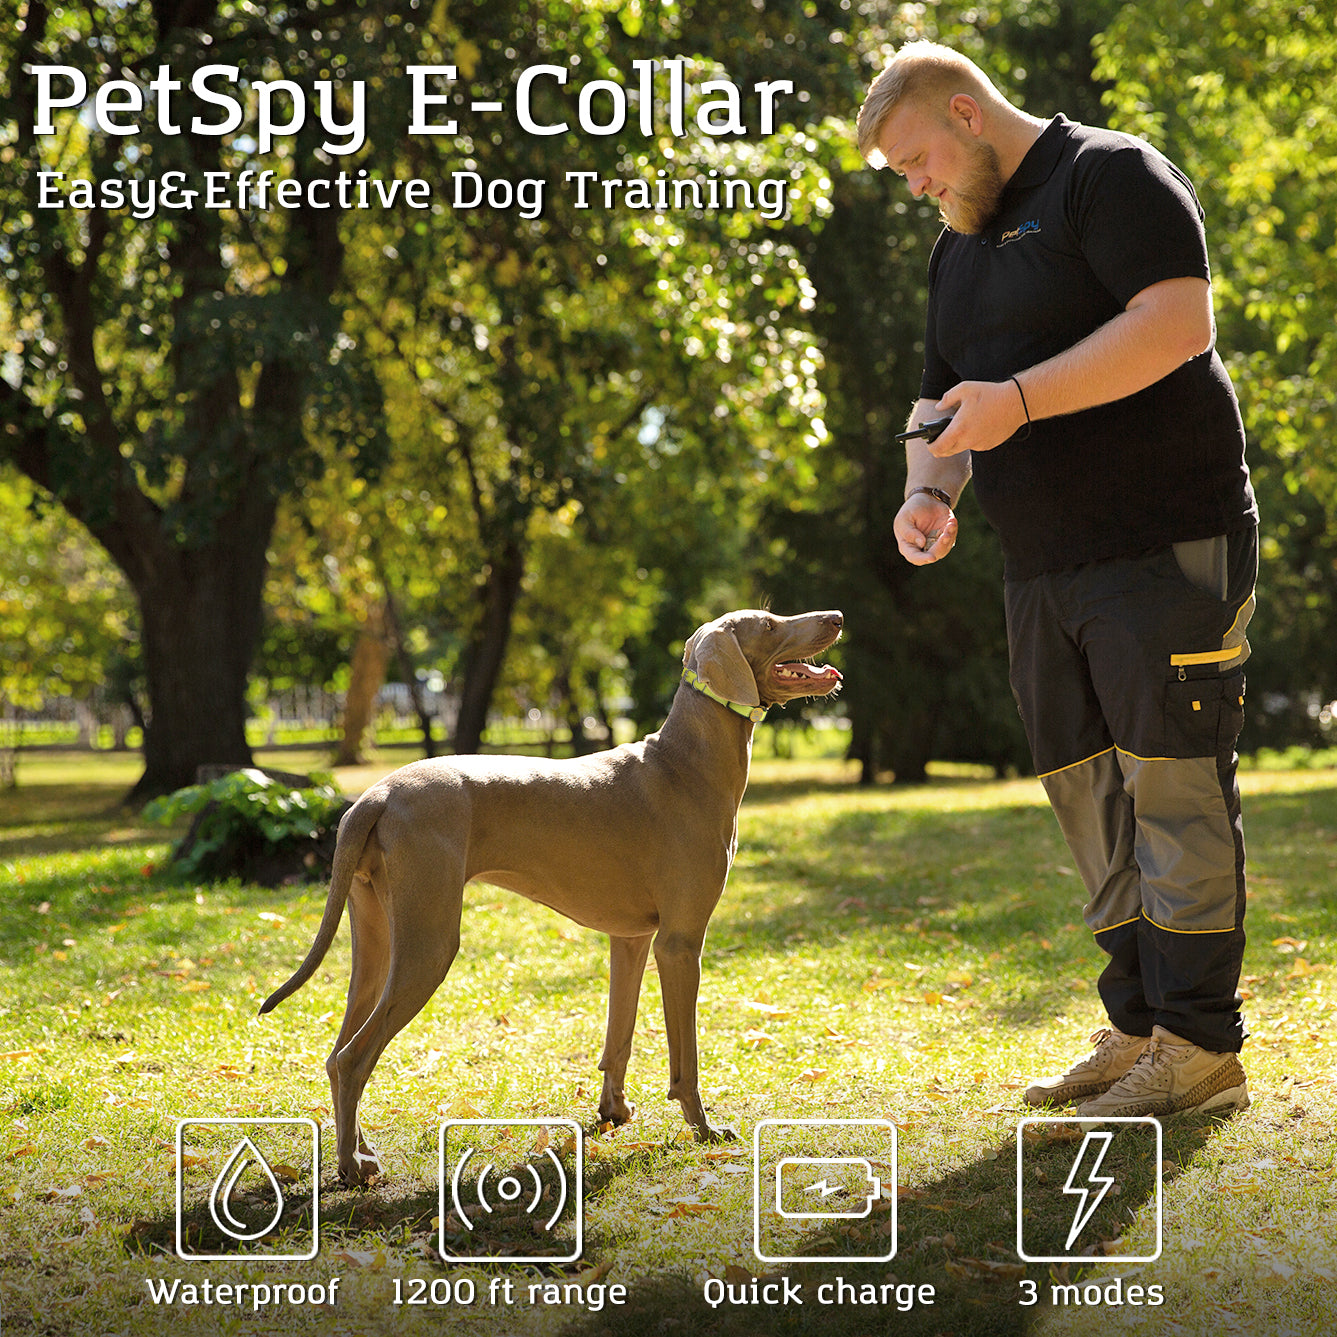 easy and effective dog training with P320